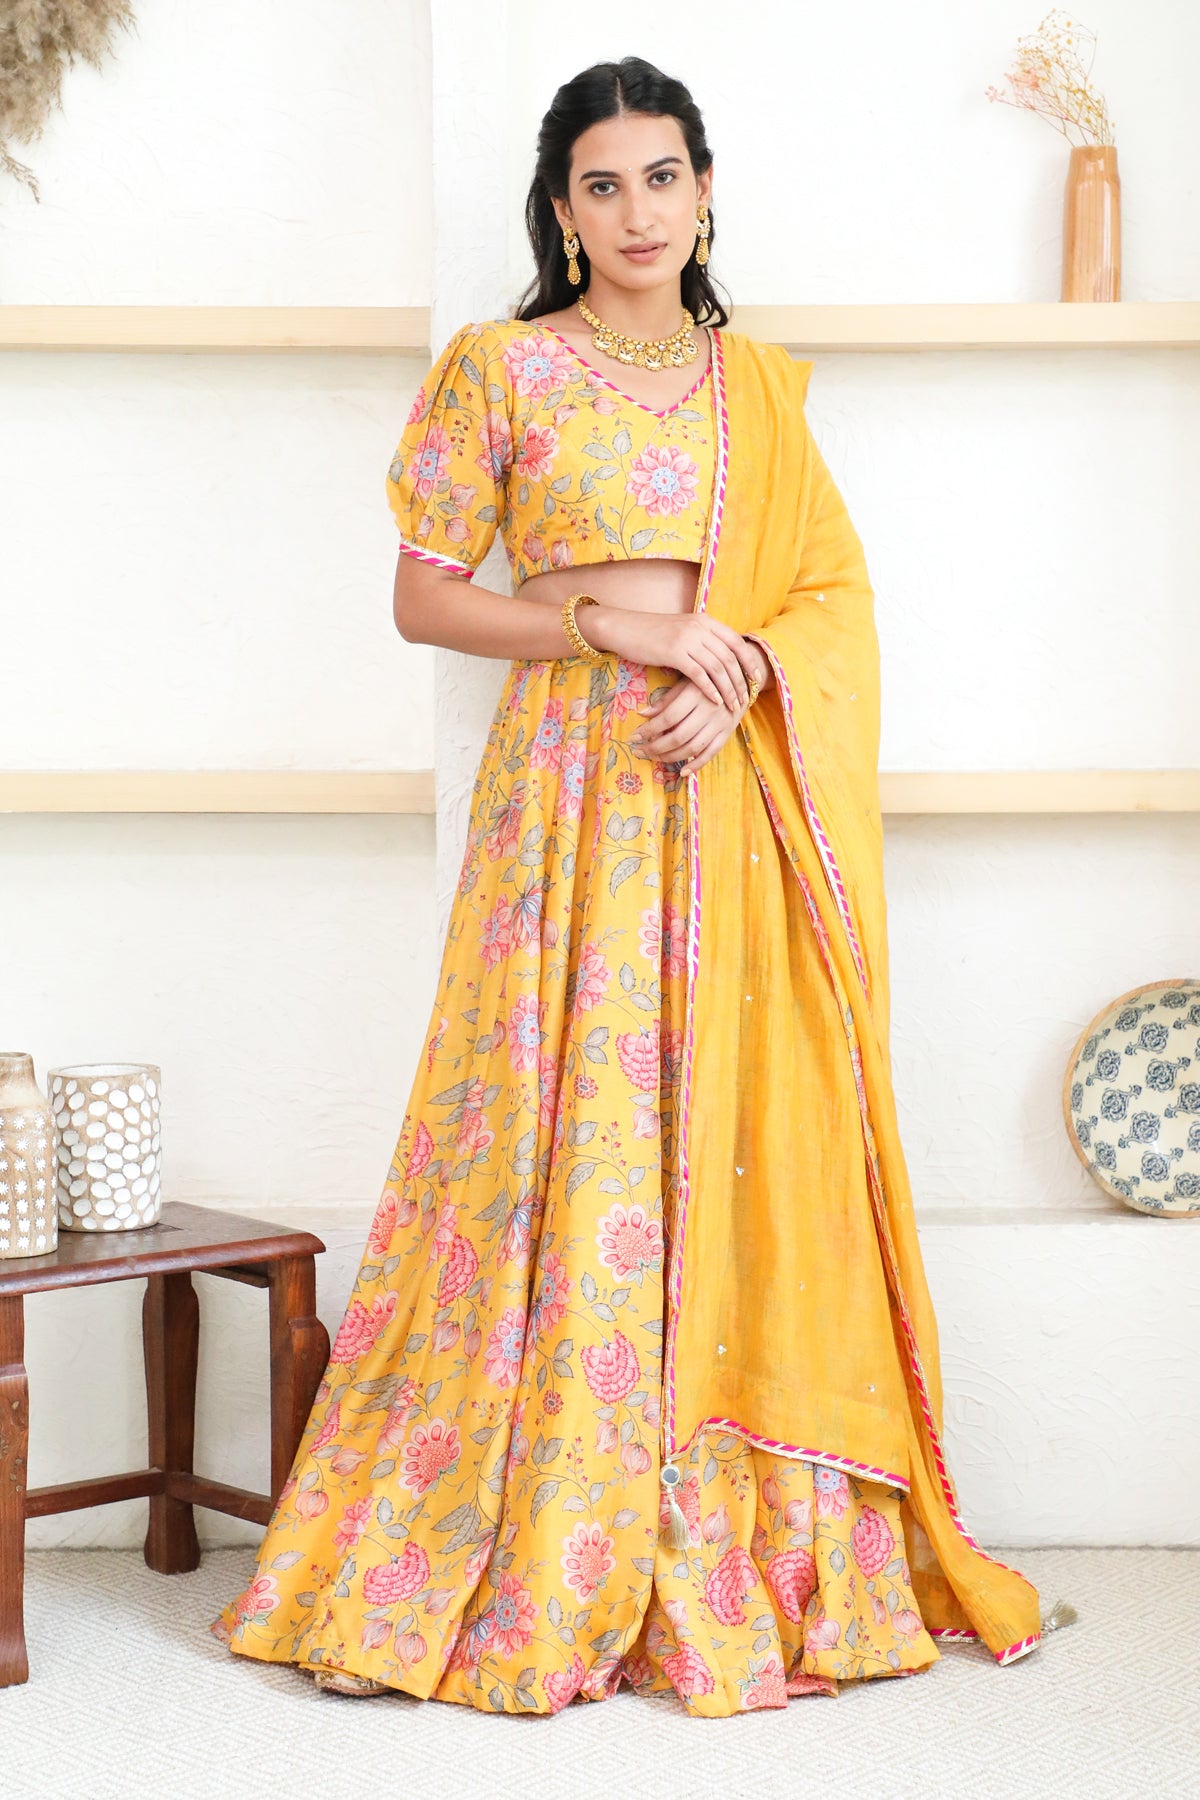 Bright Yellow Floral print Lehenga with Floral print Blouse and Dupatta - set of 3